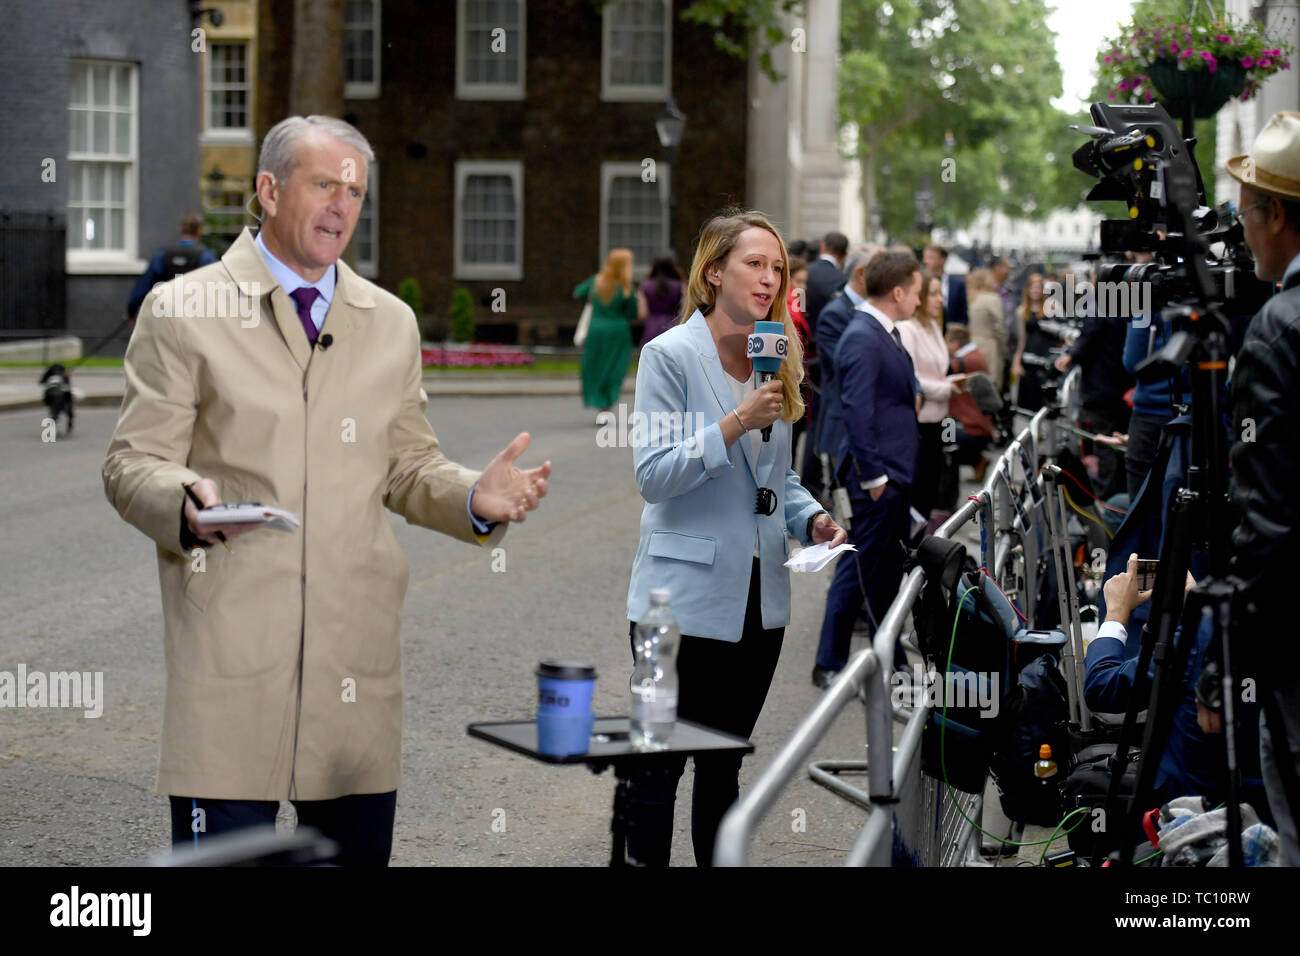 The media gather in Downing Street, London, as they await the arrival of US President Donald Trump to meet with Prime Minister Theresa May, on the second day of his state visit to the UK. Stock Photo